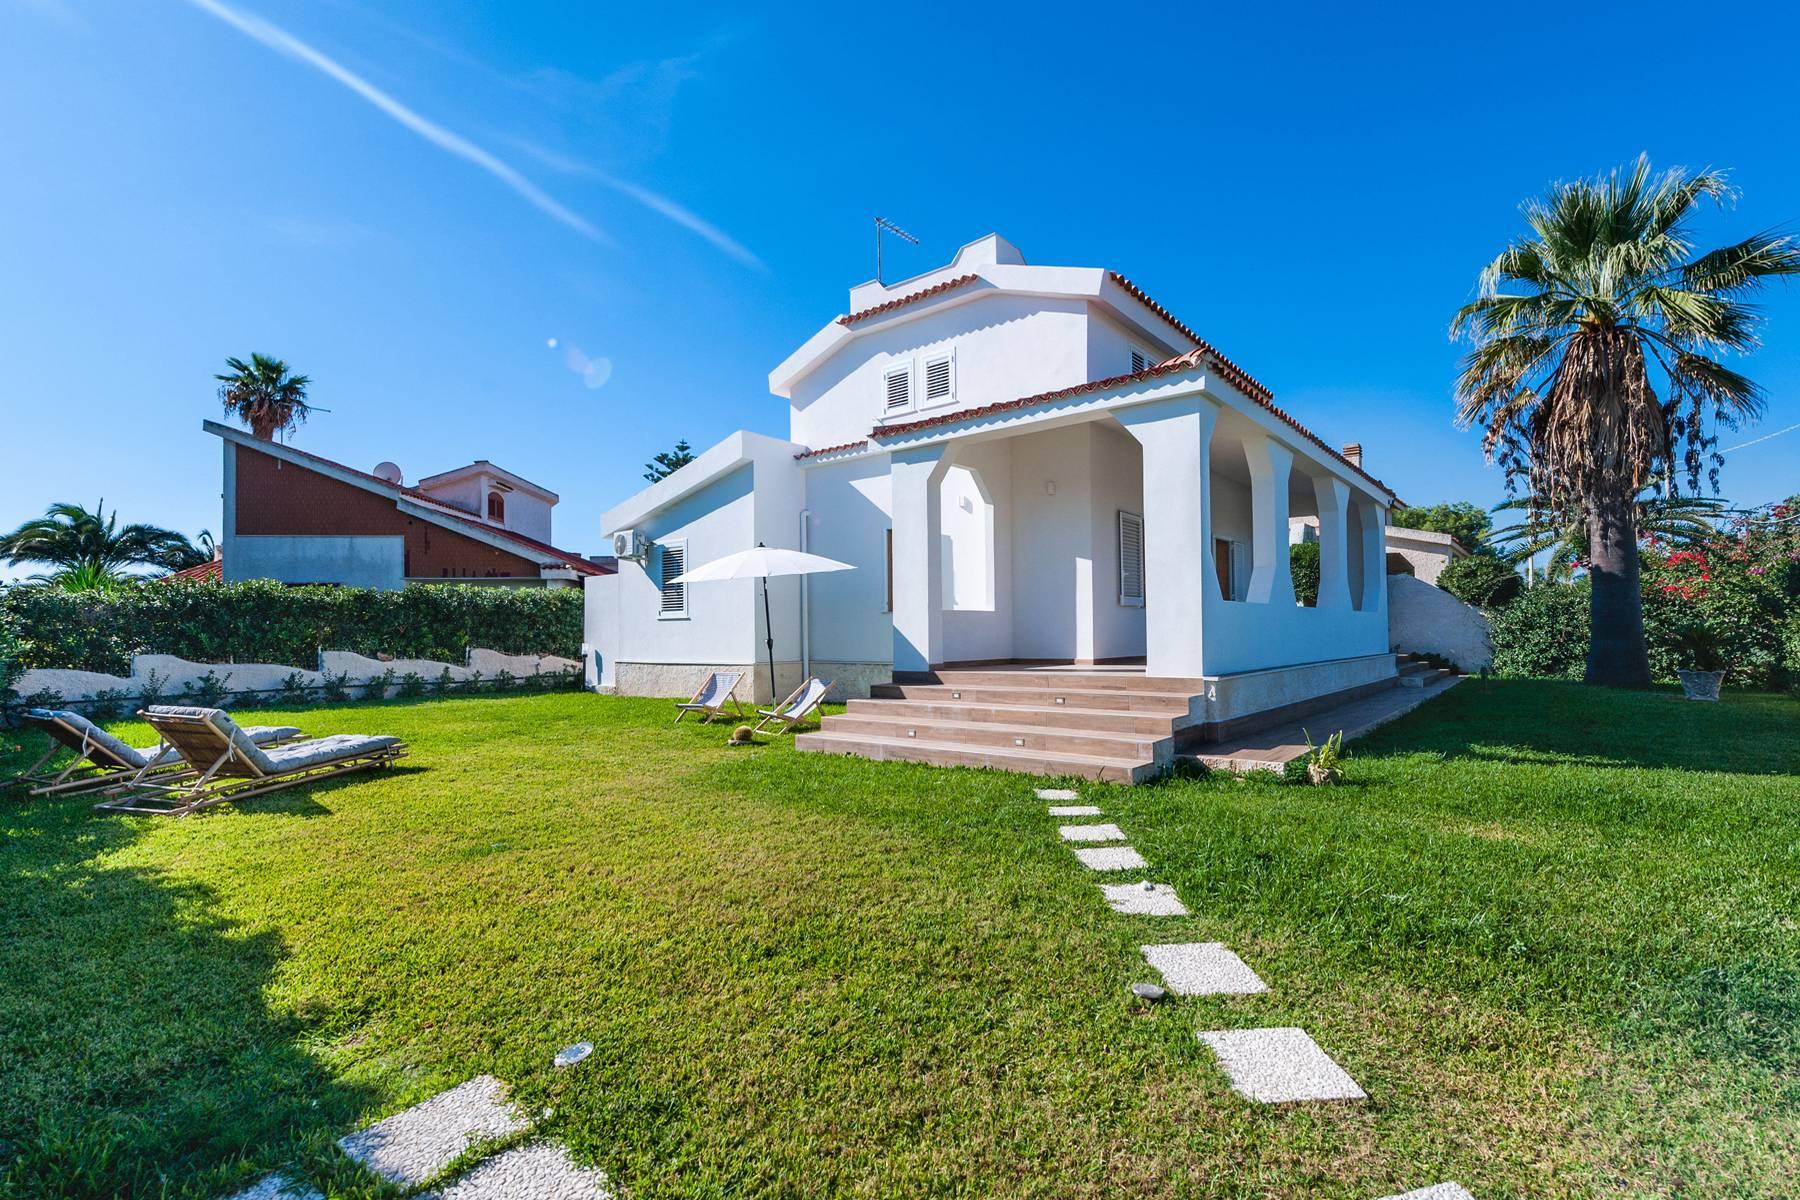 Villa in the Plemmirio Marine Protected Area with direct access to the sea - 1